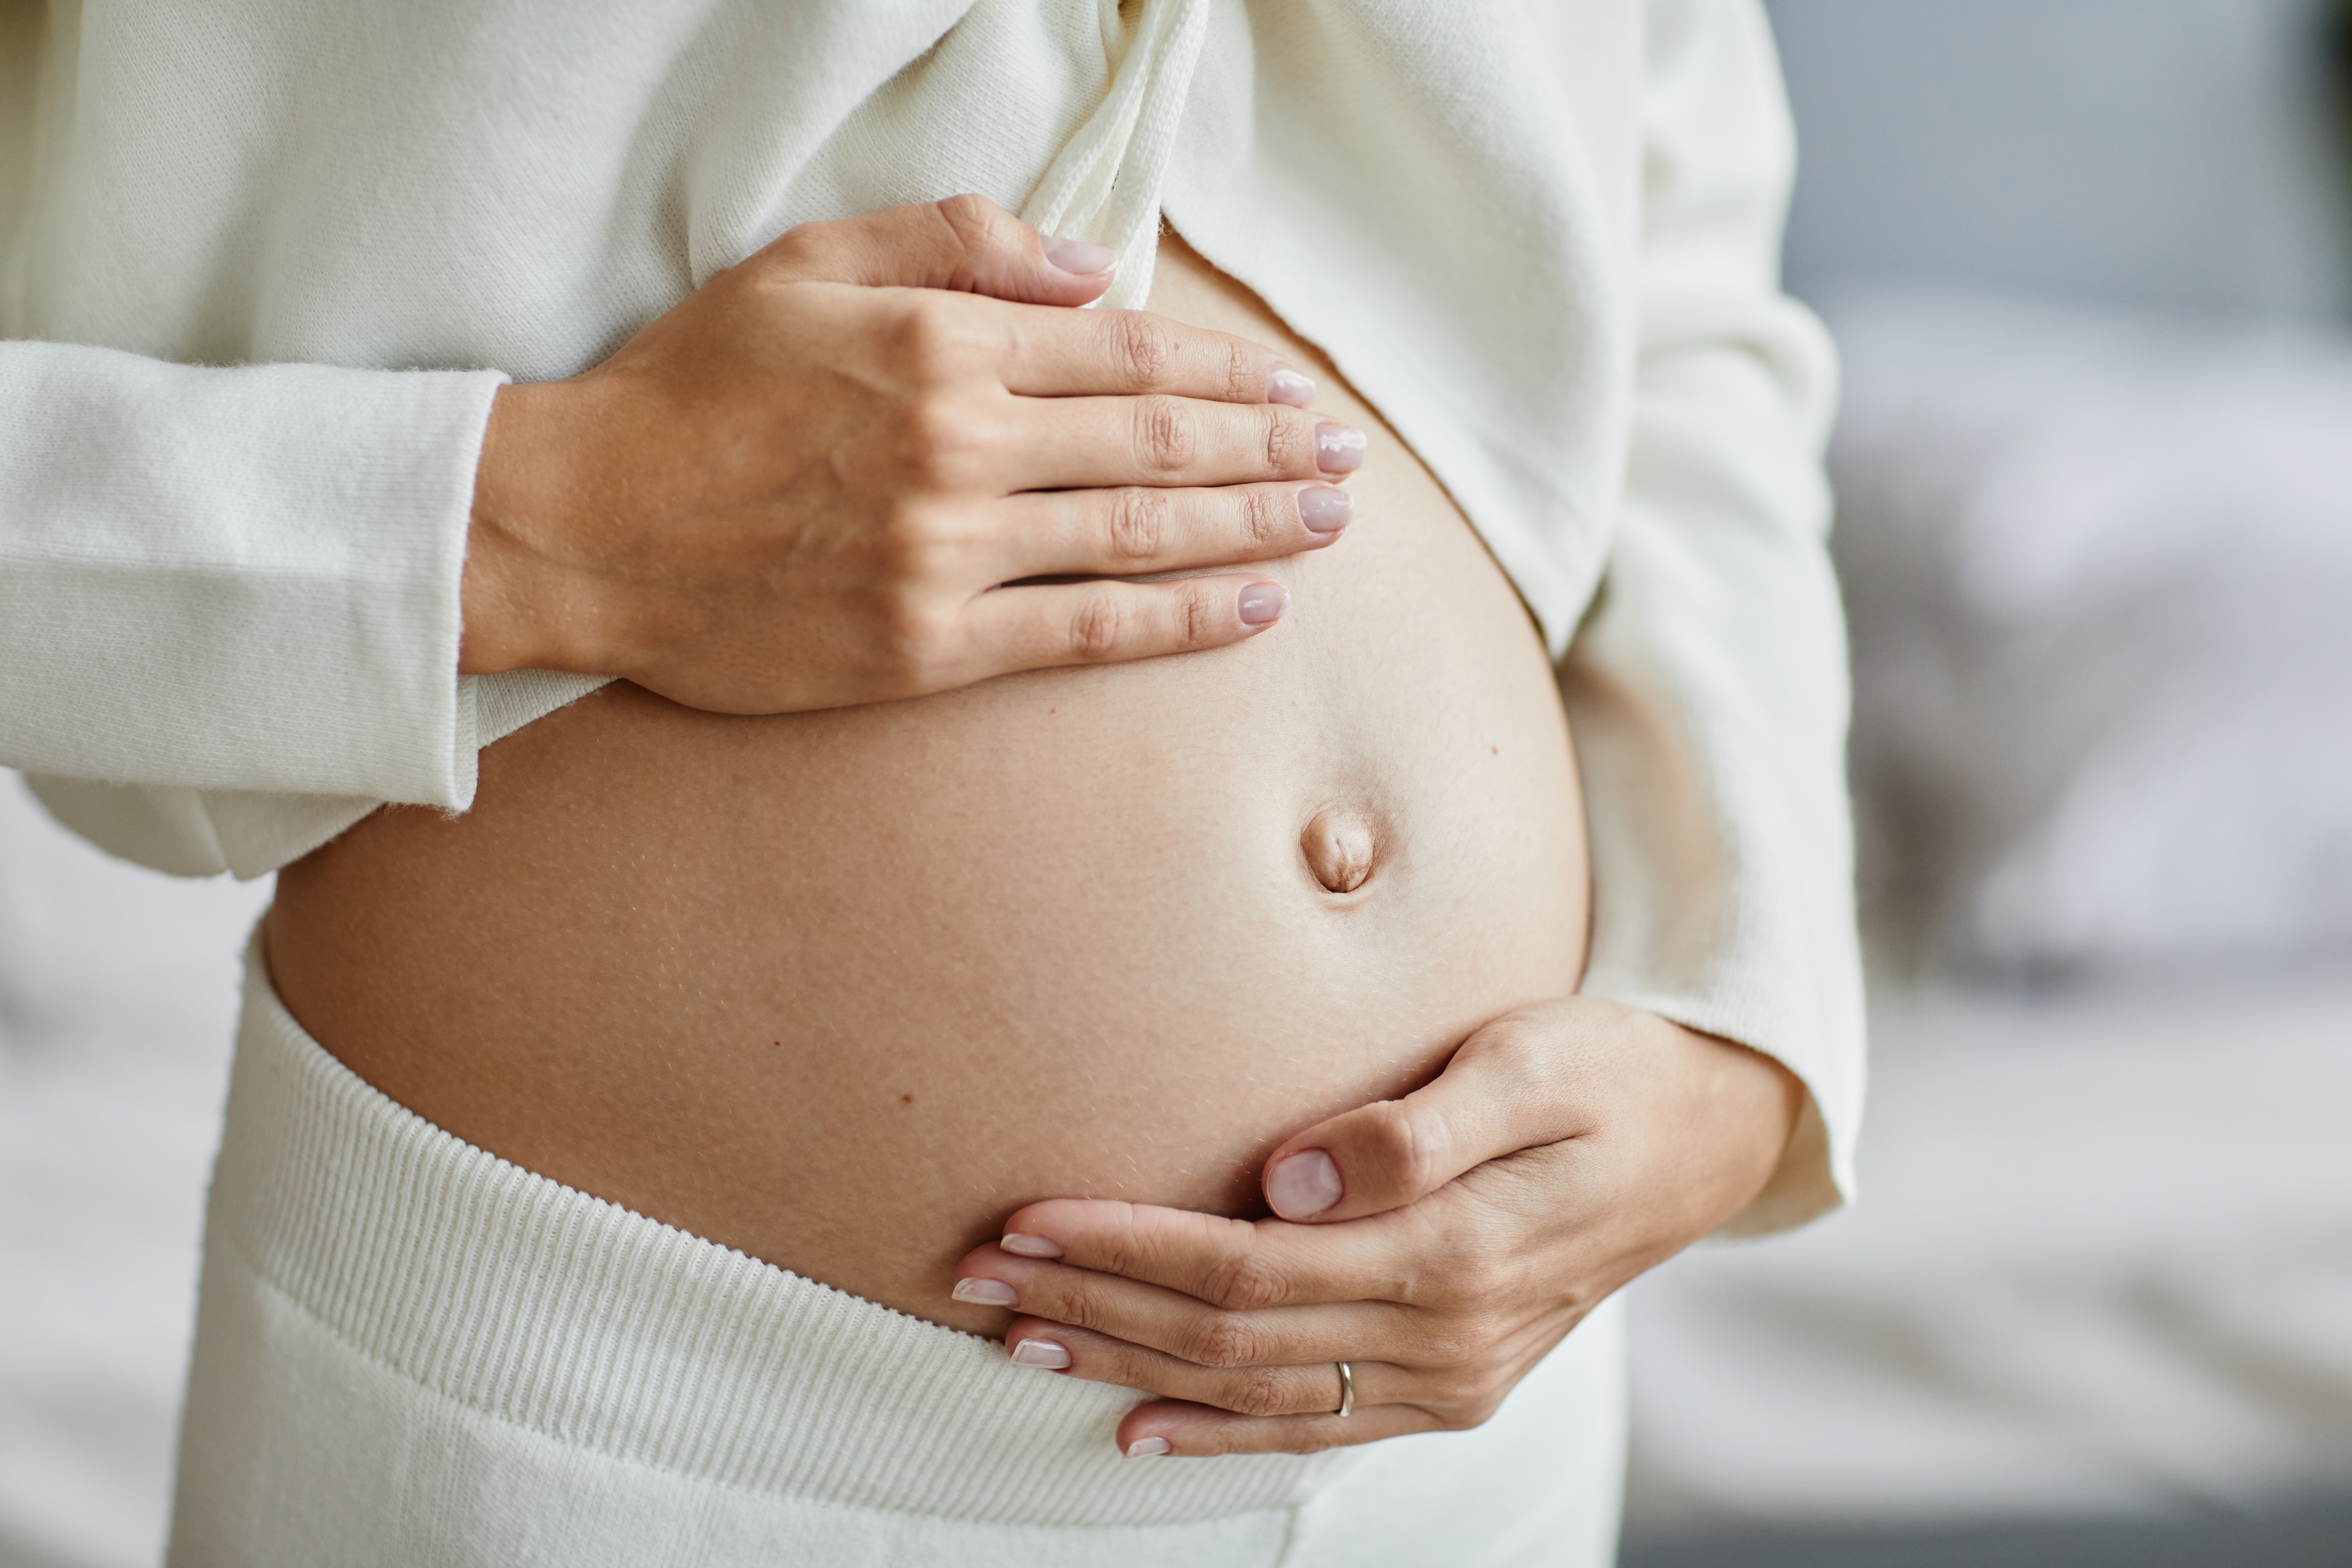 A pregnant woman holding her belly | Source: Shutterstock